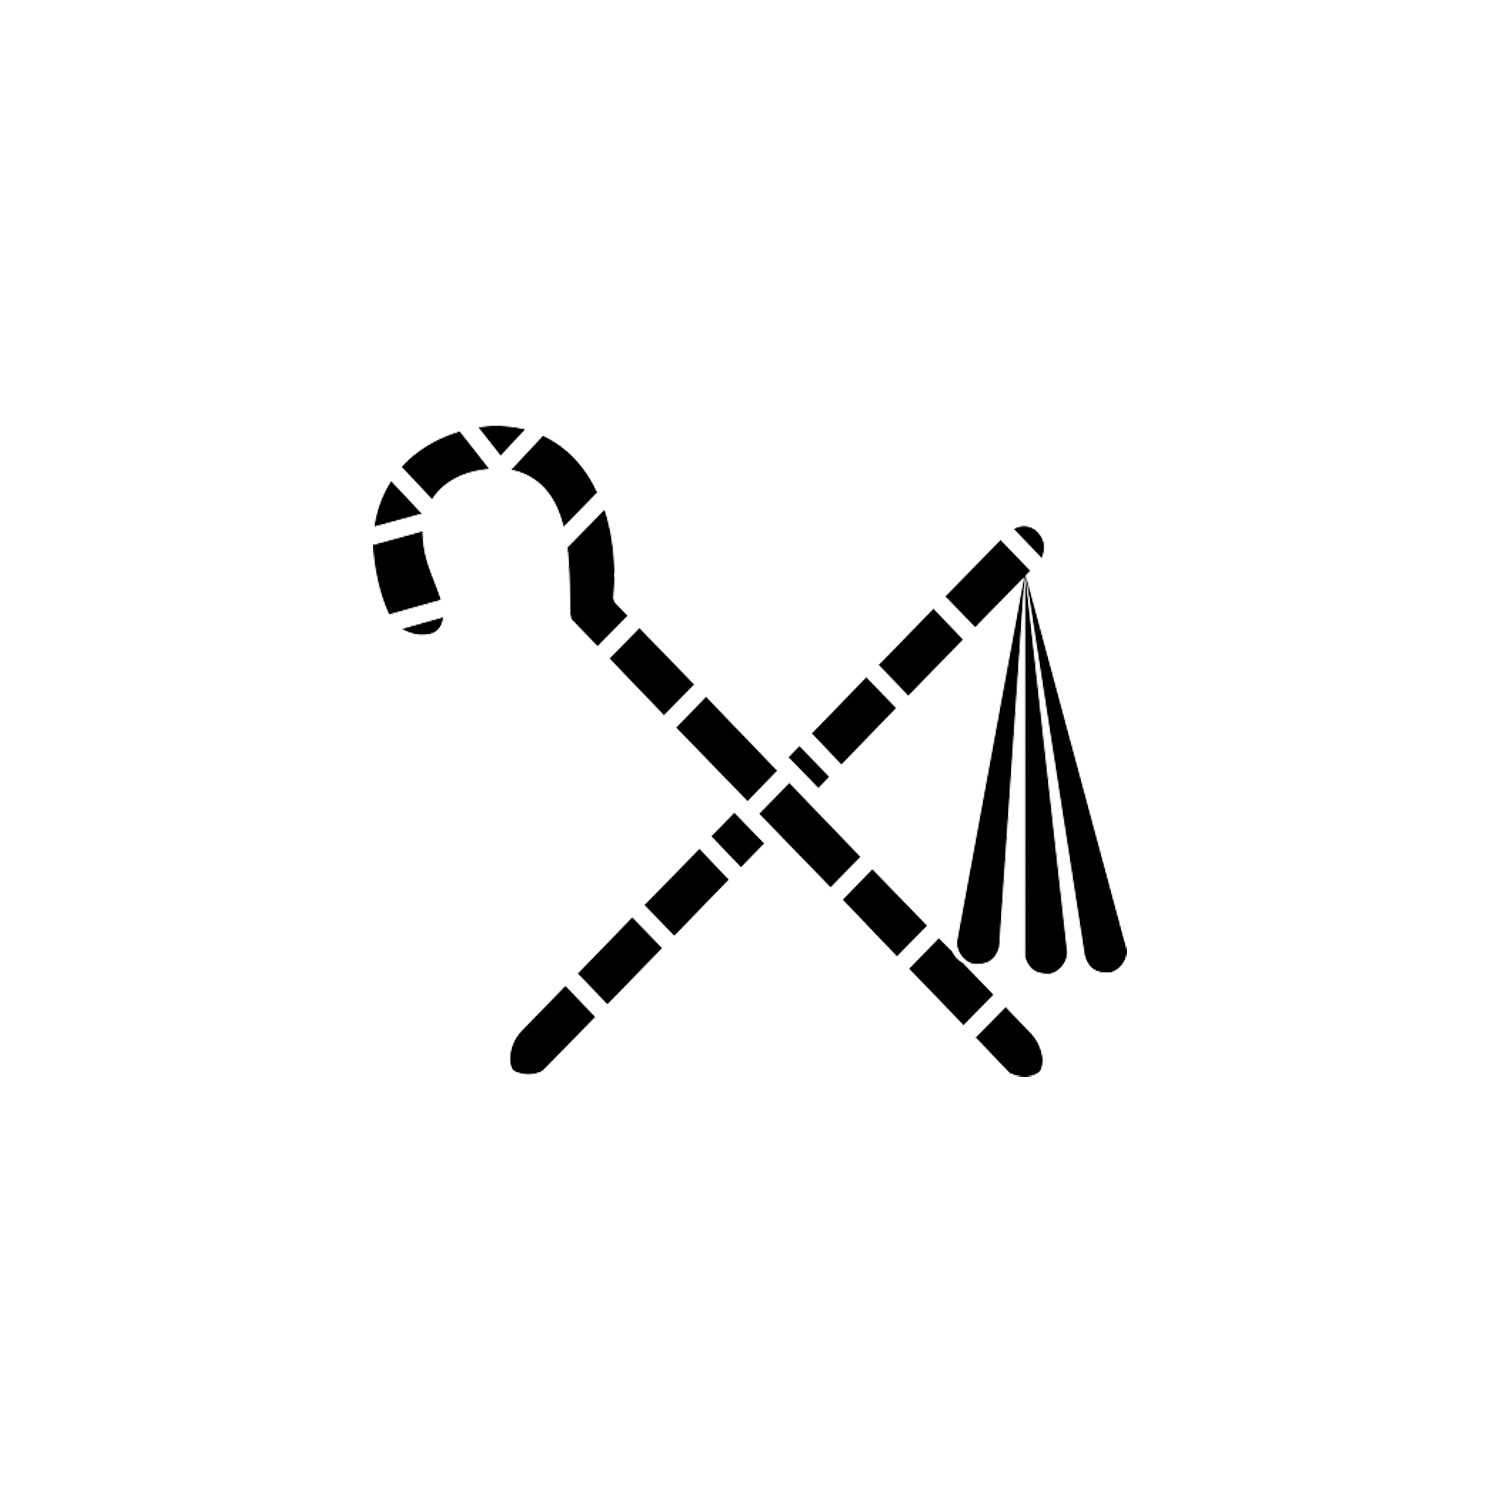 crook-and-flail-symbol